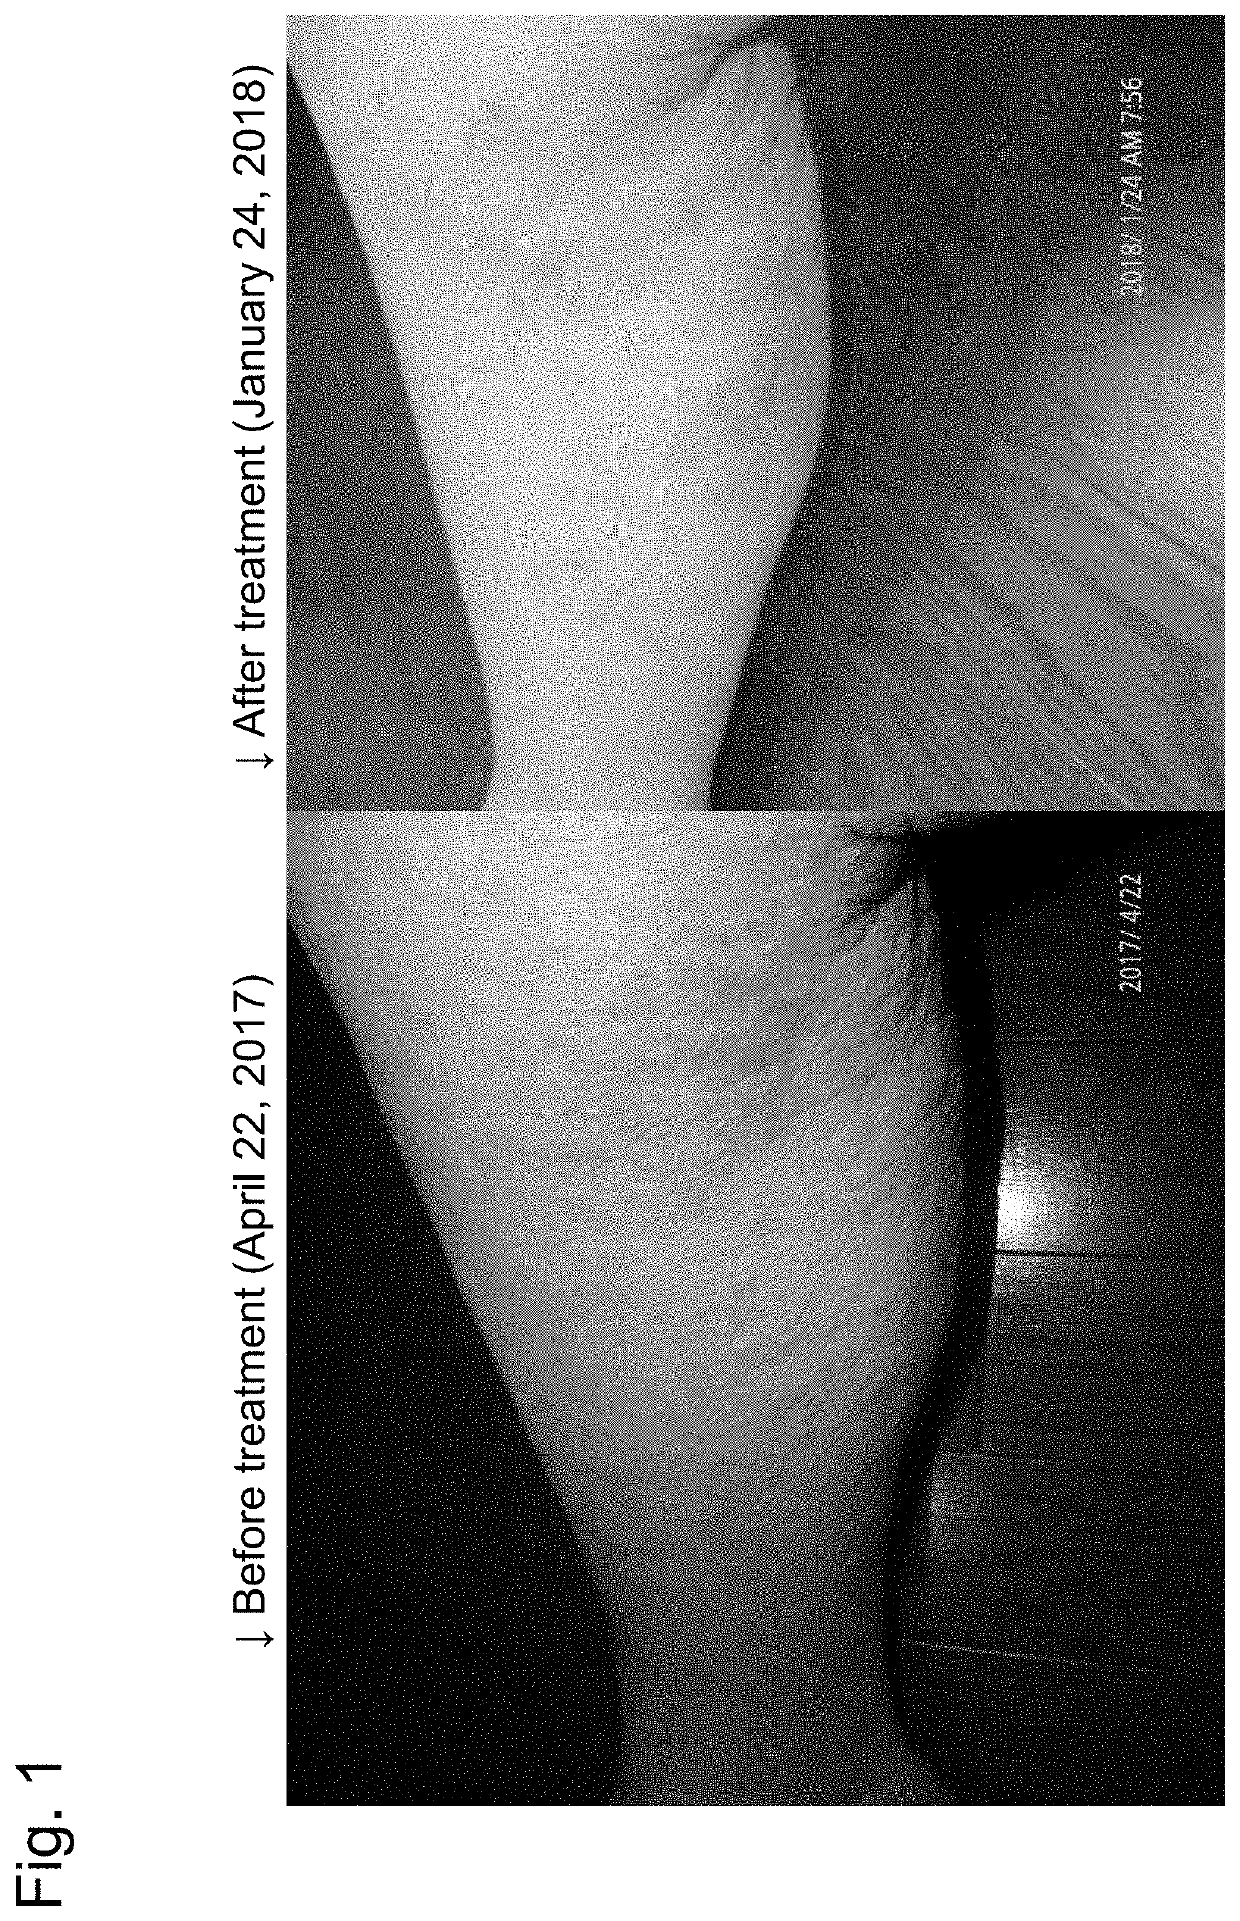 Method for reducing itching in atopic dermatitis